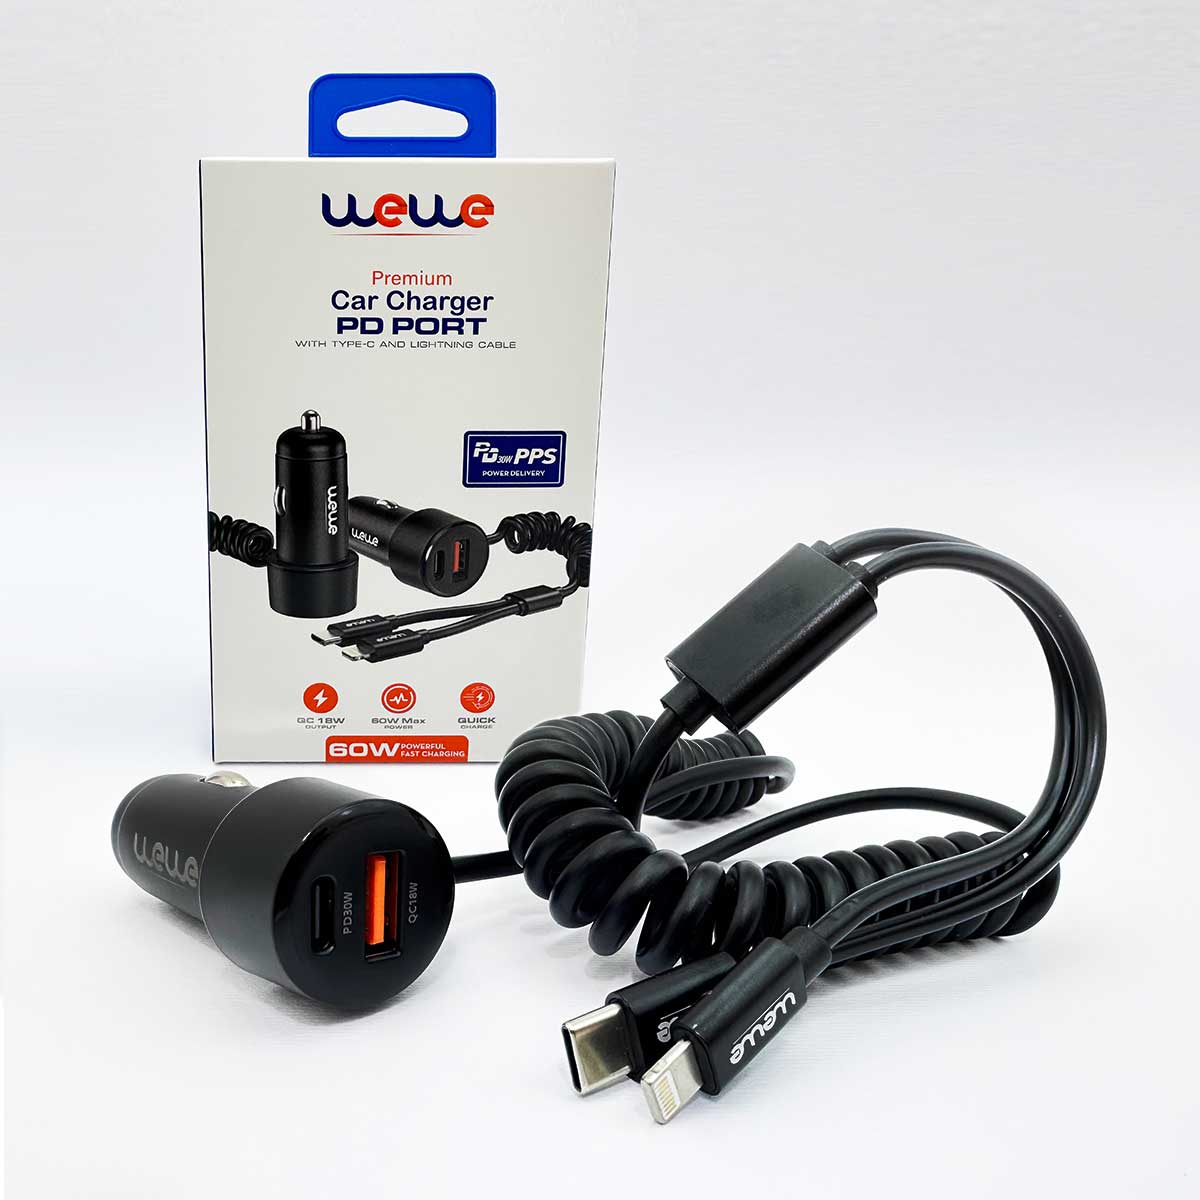 wewe premium car charger pd port with type -c and lightning cable - cv-006